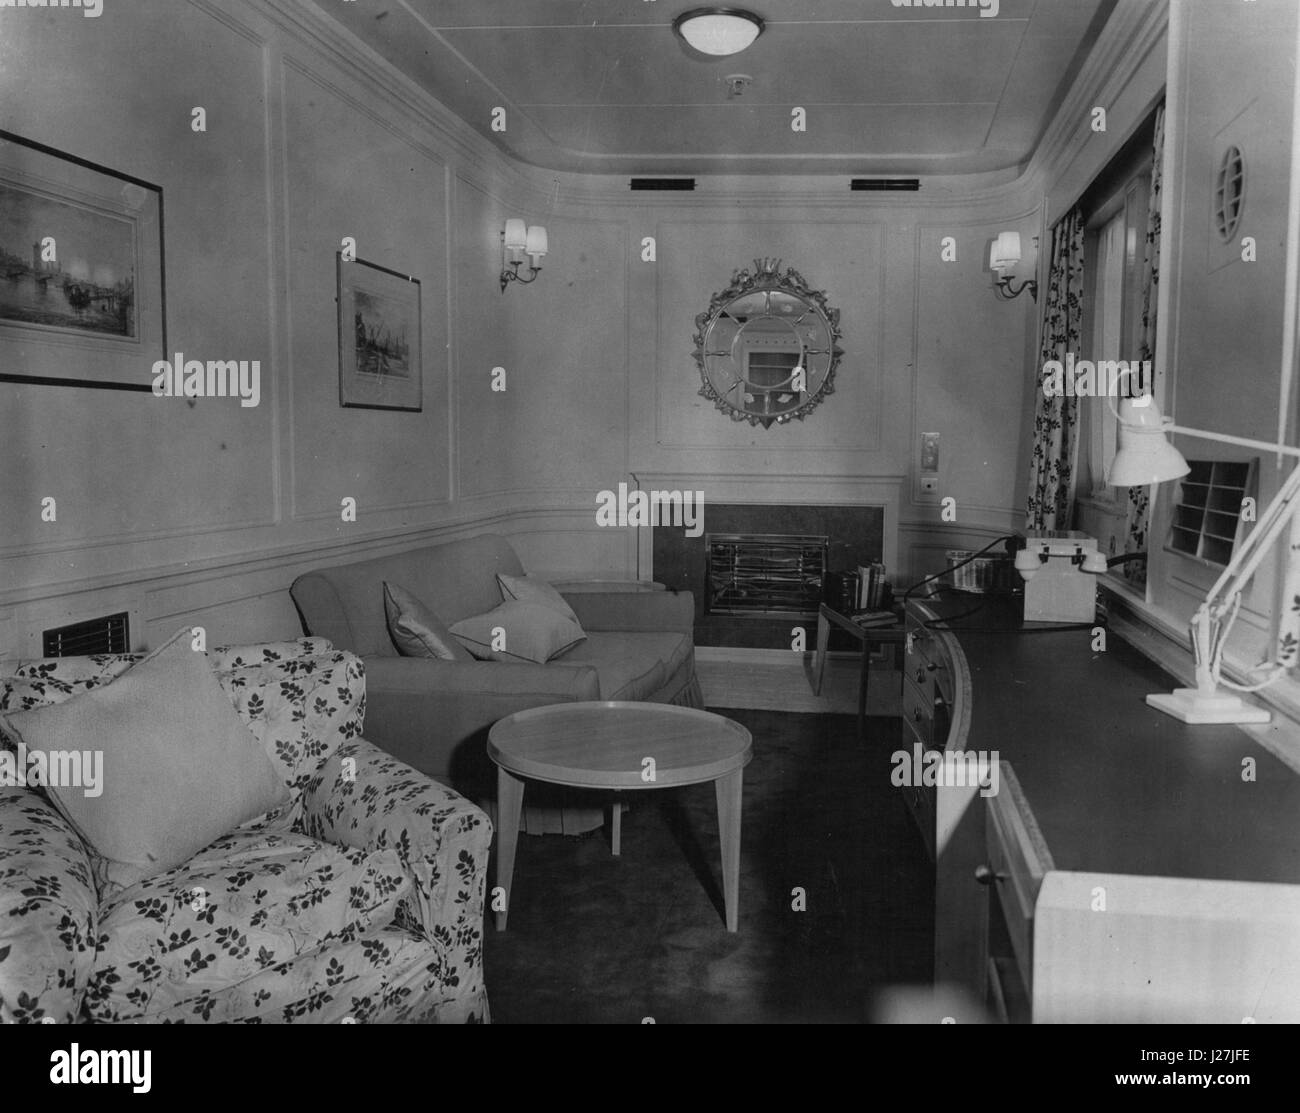 May 05, 1954 - First picture on board the Royal Yacht 'Britannia'' press representatives were allowed today to visit H.M. Yacht 'Britannia'', now in the pool of London. On the yacht's return from the Mediterranean having brought back Her Majesty from her Commonwealth tour. OPS: A view of the Queen's Sitting Room aboard The Royal Yacht ''Britannia' (Credit Image: © Keystone Press Agency/Keystone USA via ZUMAPRESS.com) Stock Photo